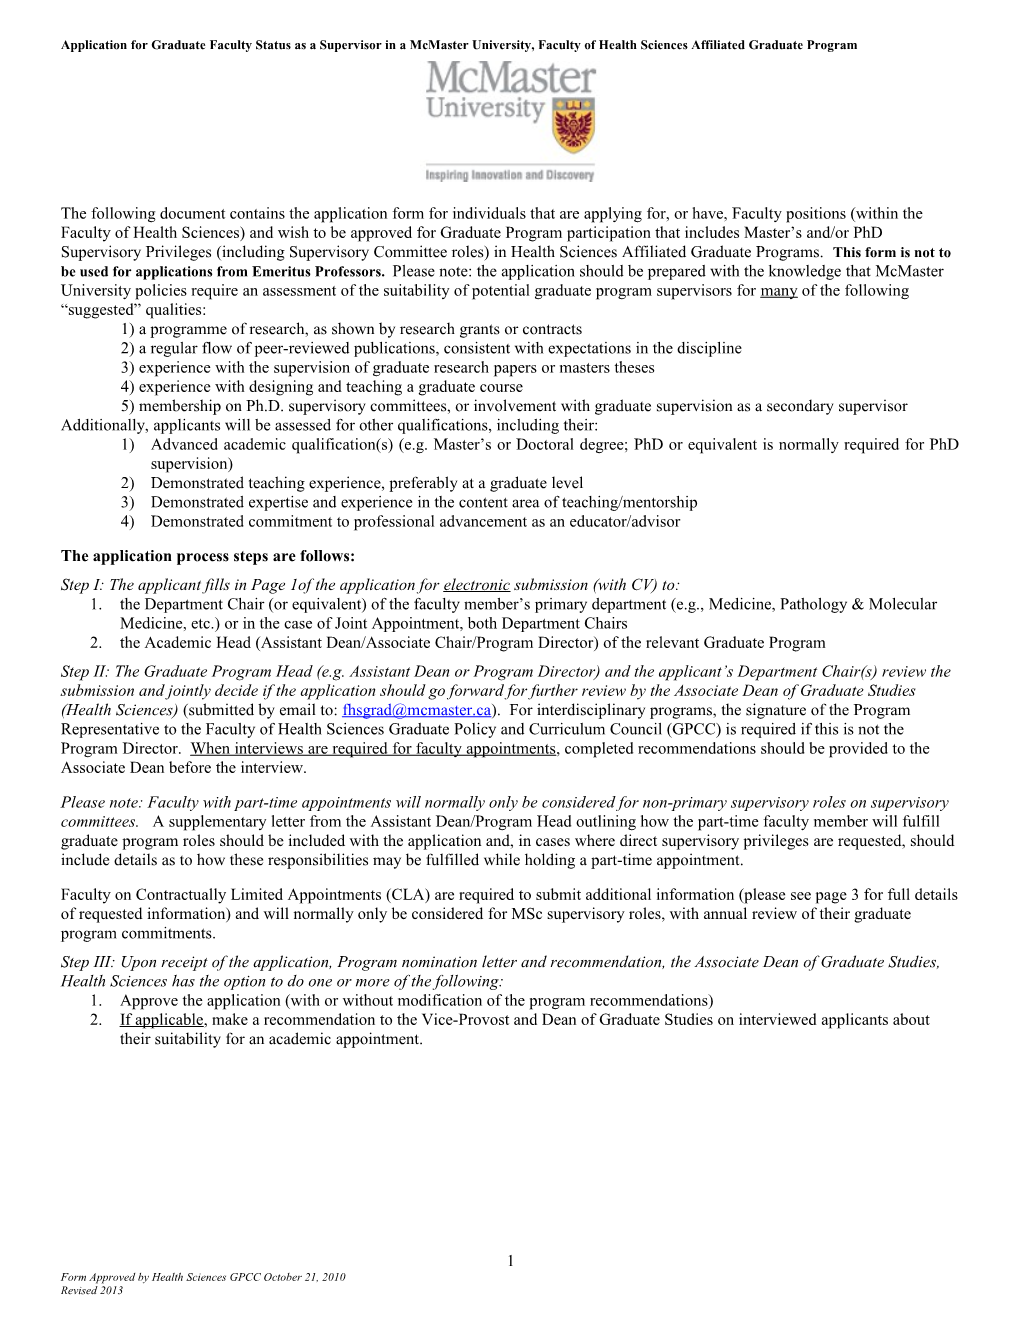 Application for Graduate Faculty Status As a Supervisor in a Mcmasteruniversity, Faculty